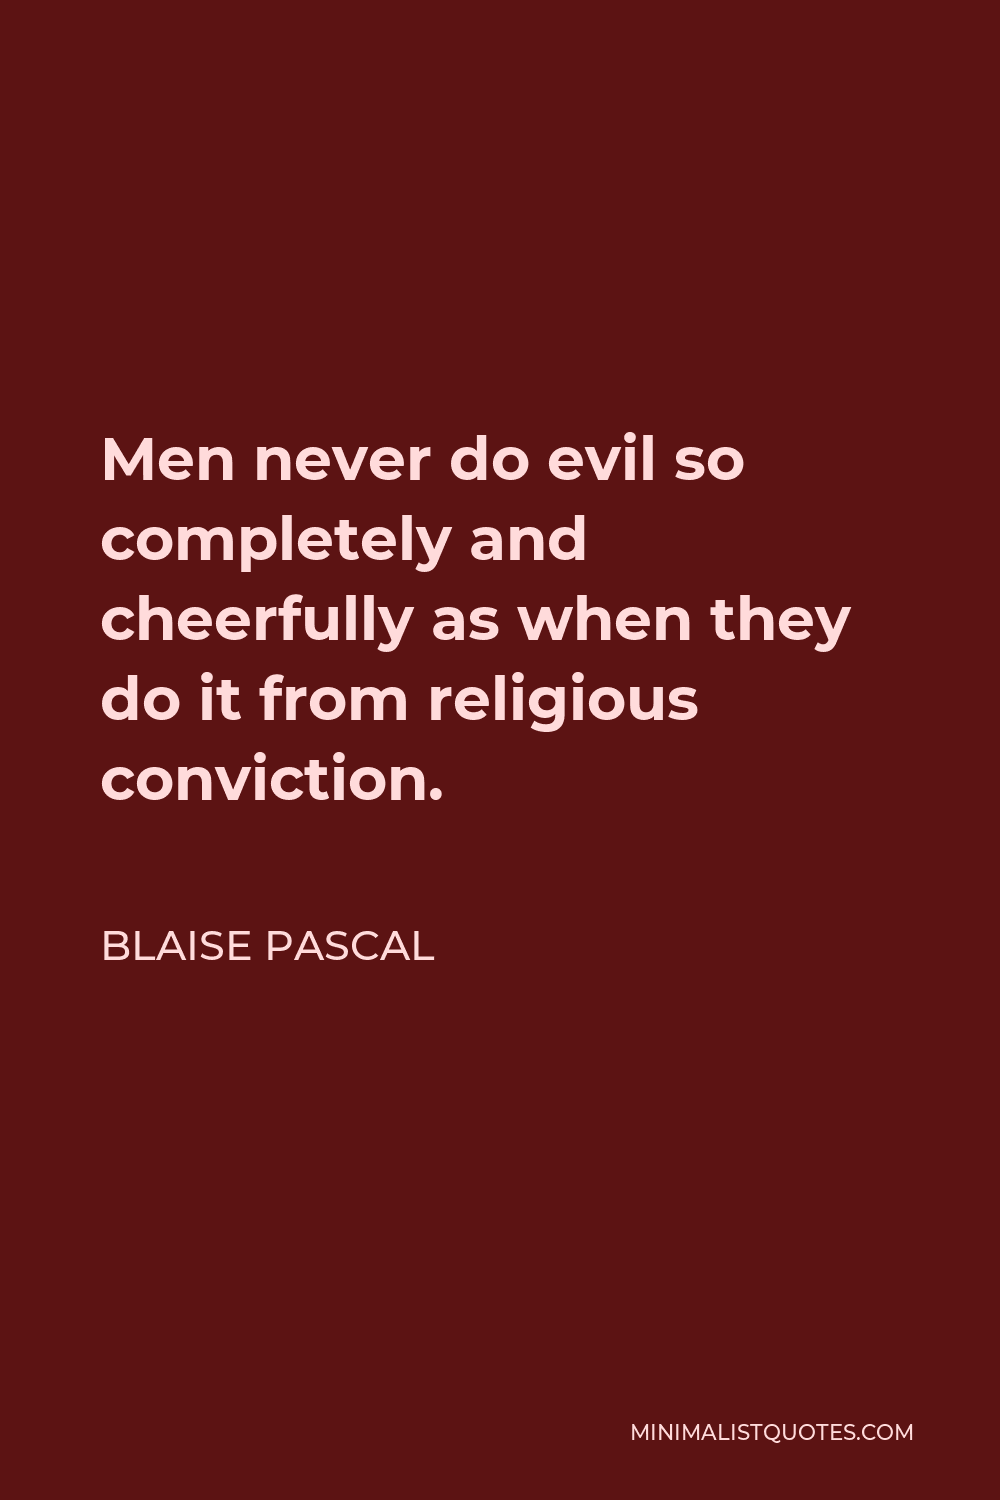 Blaise Pascal Quote - Men never do evil so completely and cheerfully as when they do it from religious conviction.